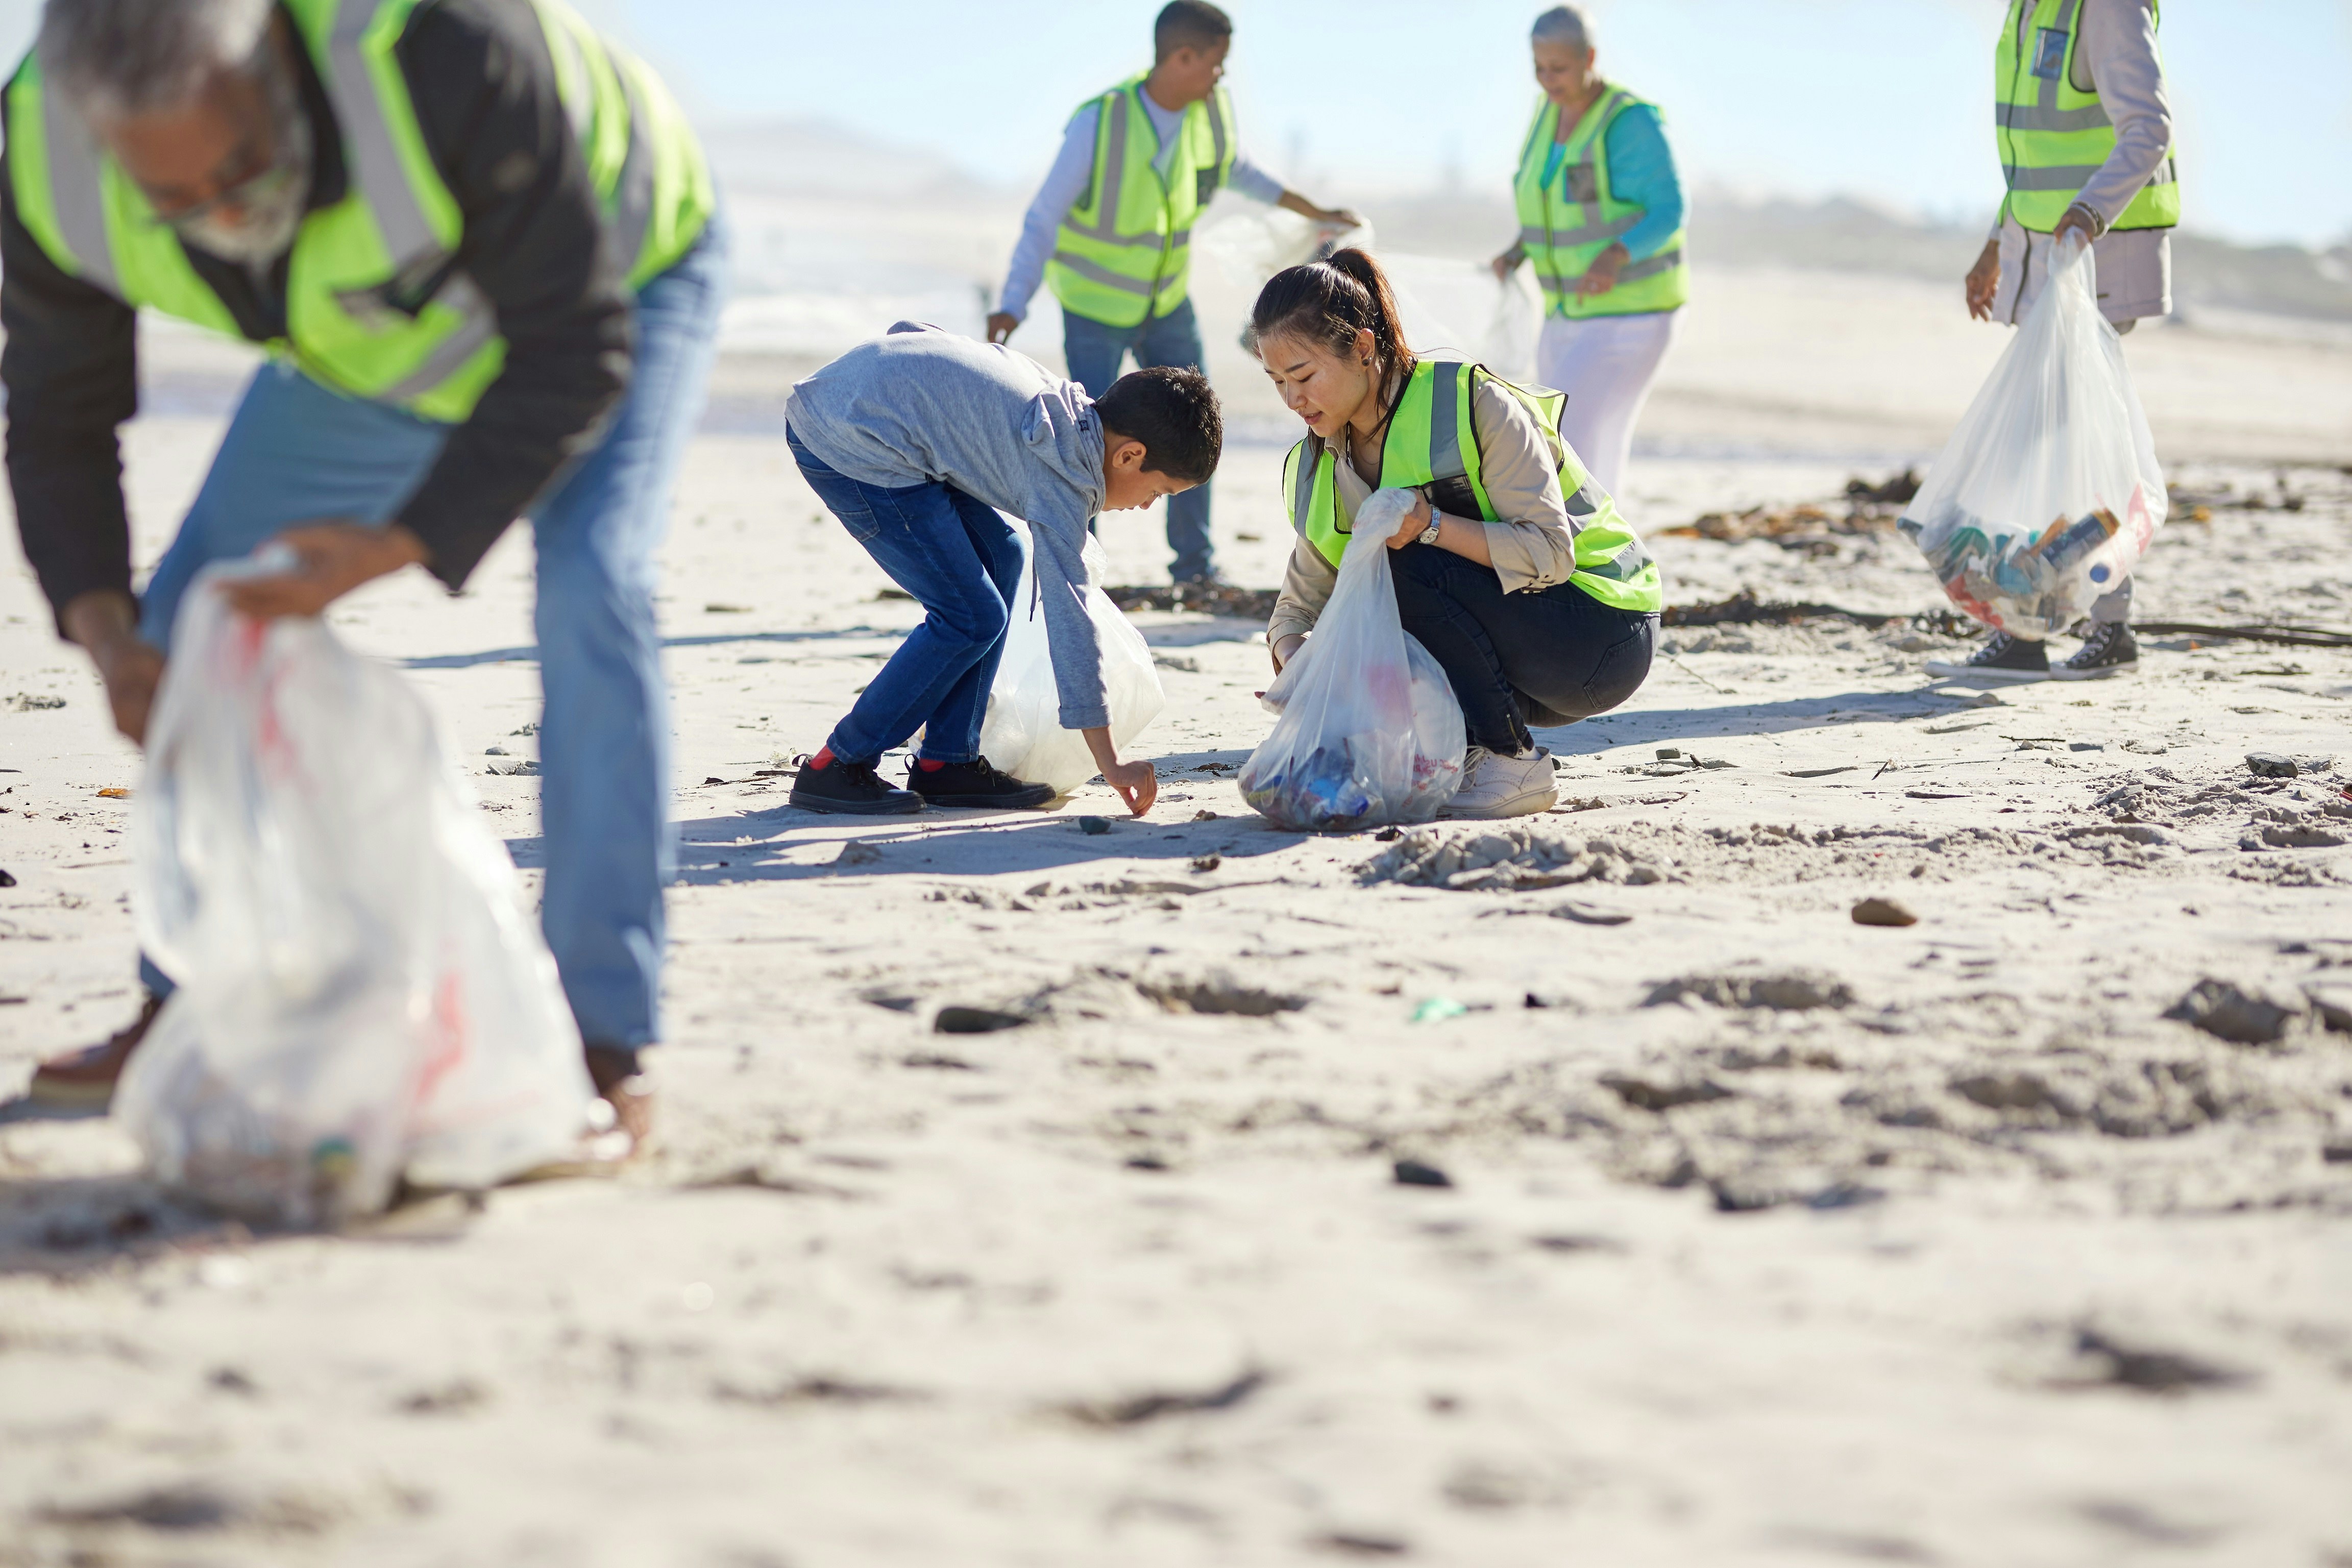 A woman and young boy pick up rubbish from a large white beach. The two people are surrounded by other litter pickers, who are wearing high vis jackets and holding white bags.